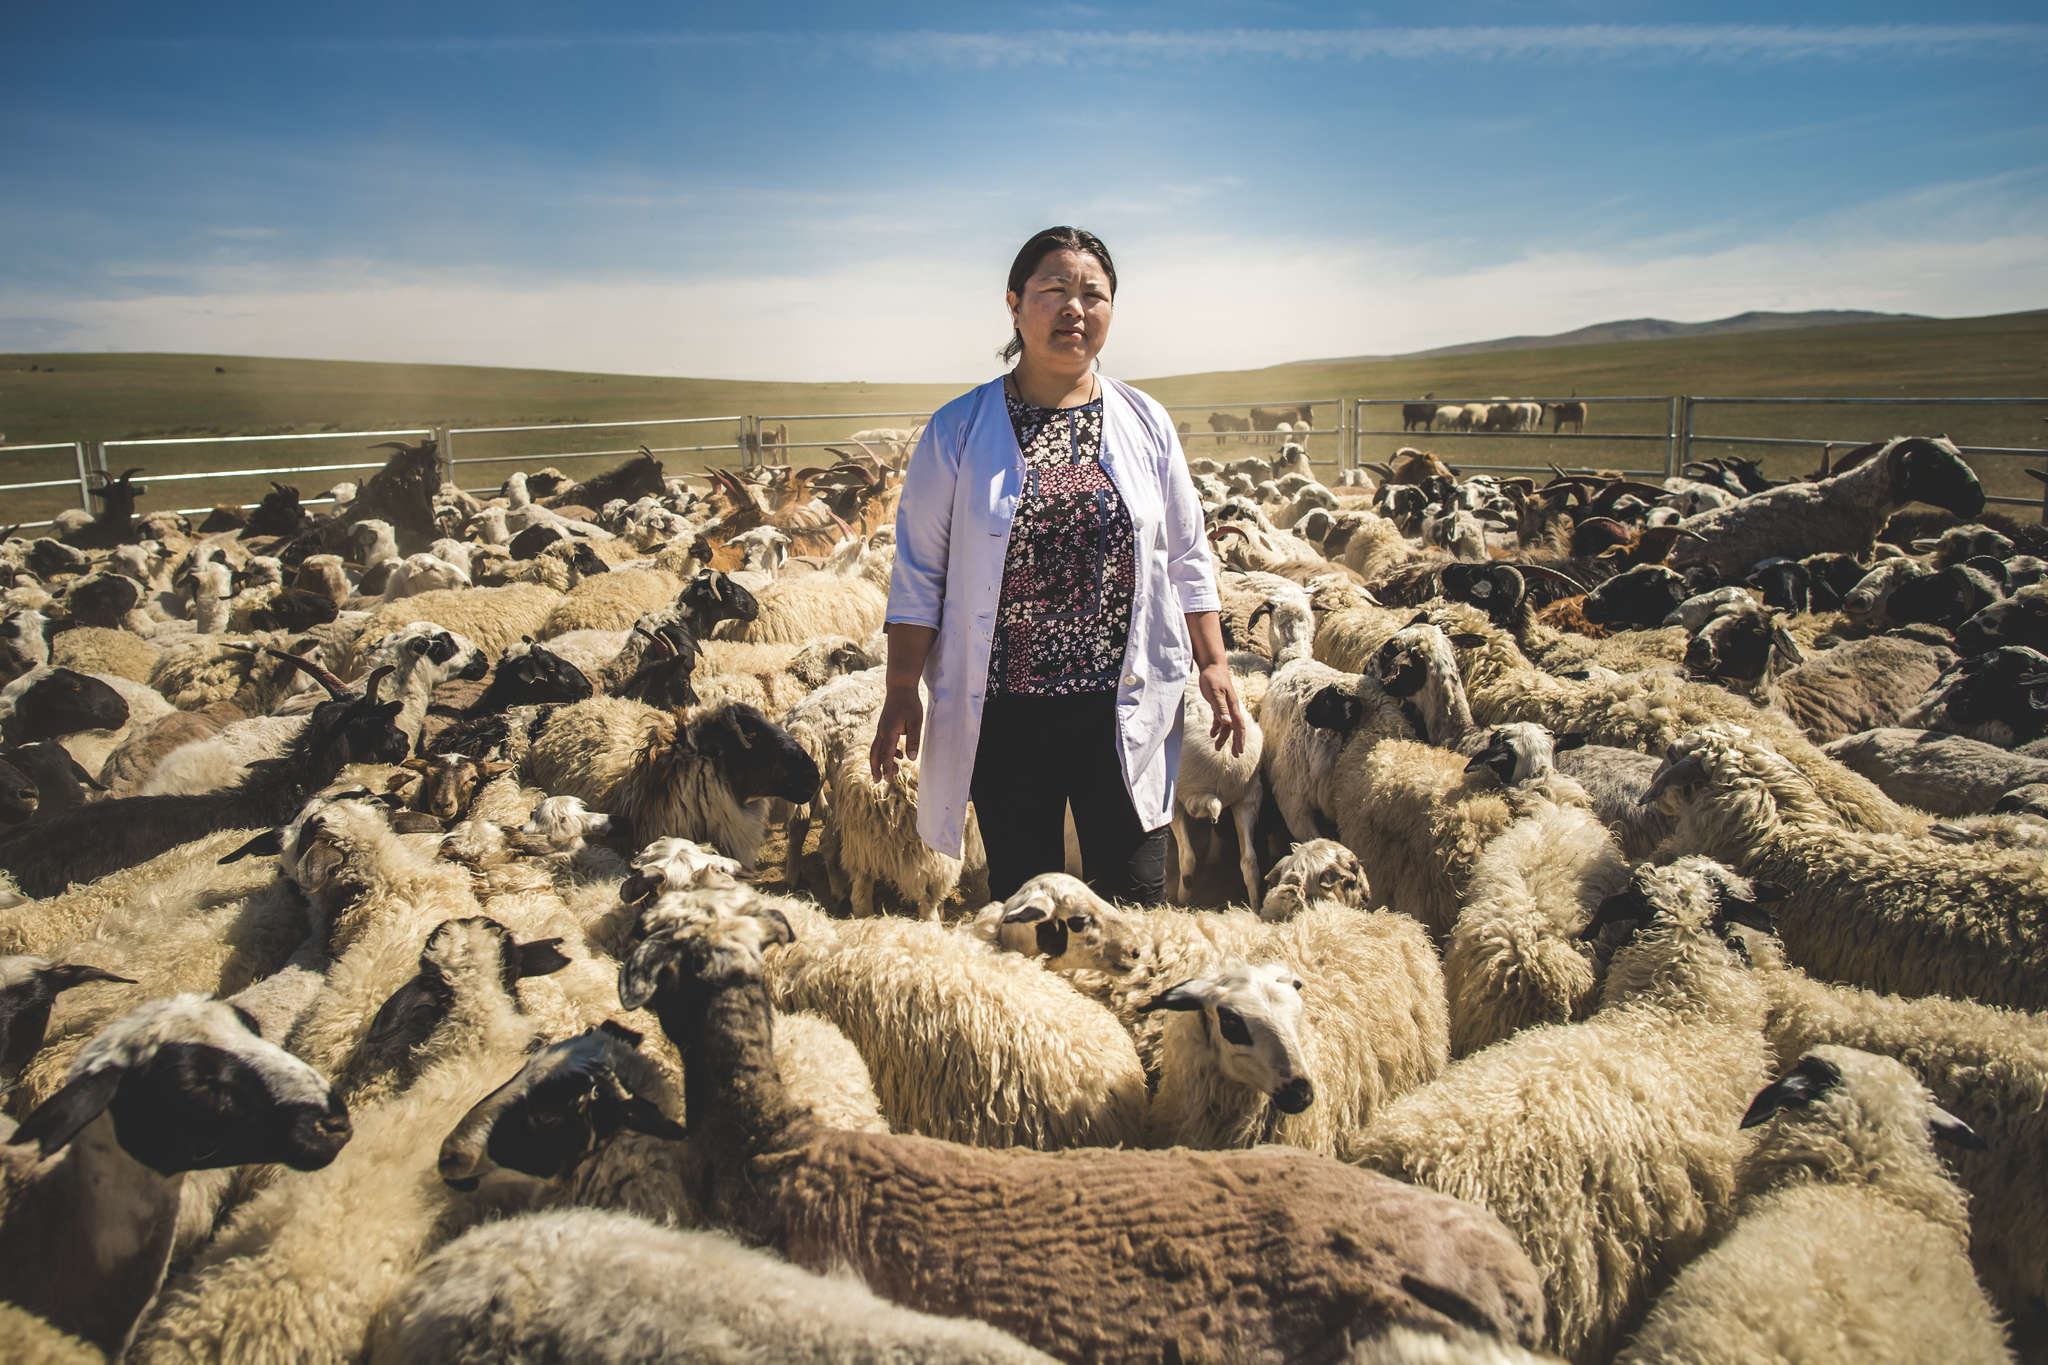 A person standing among a herd of sheep.